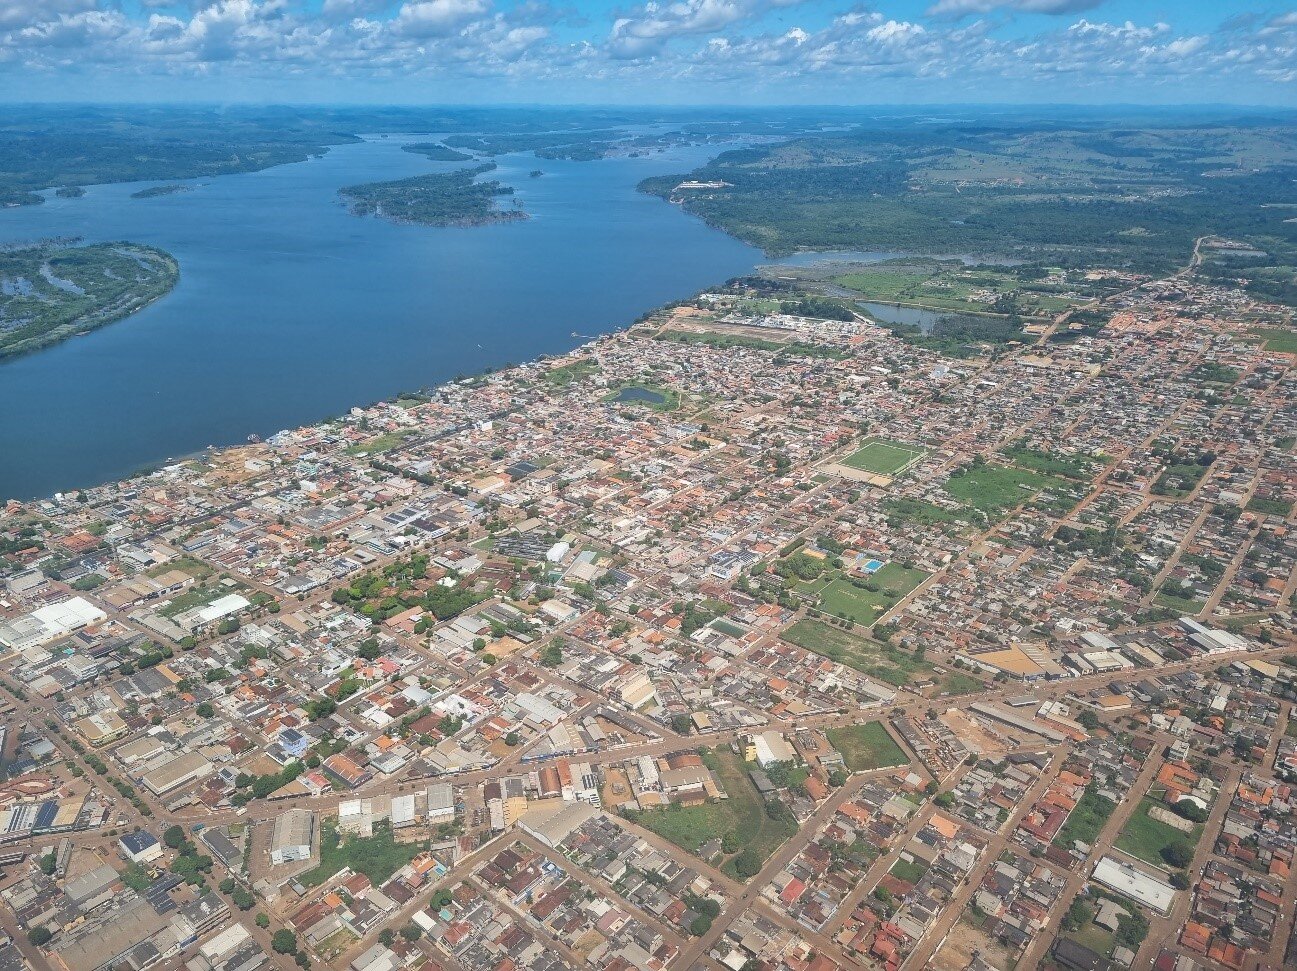 #Study finds food insecurity is significant among inhabitants of the region affected by the Belo Monte dam in Brazil